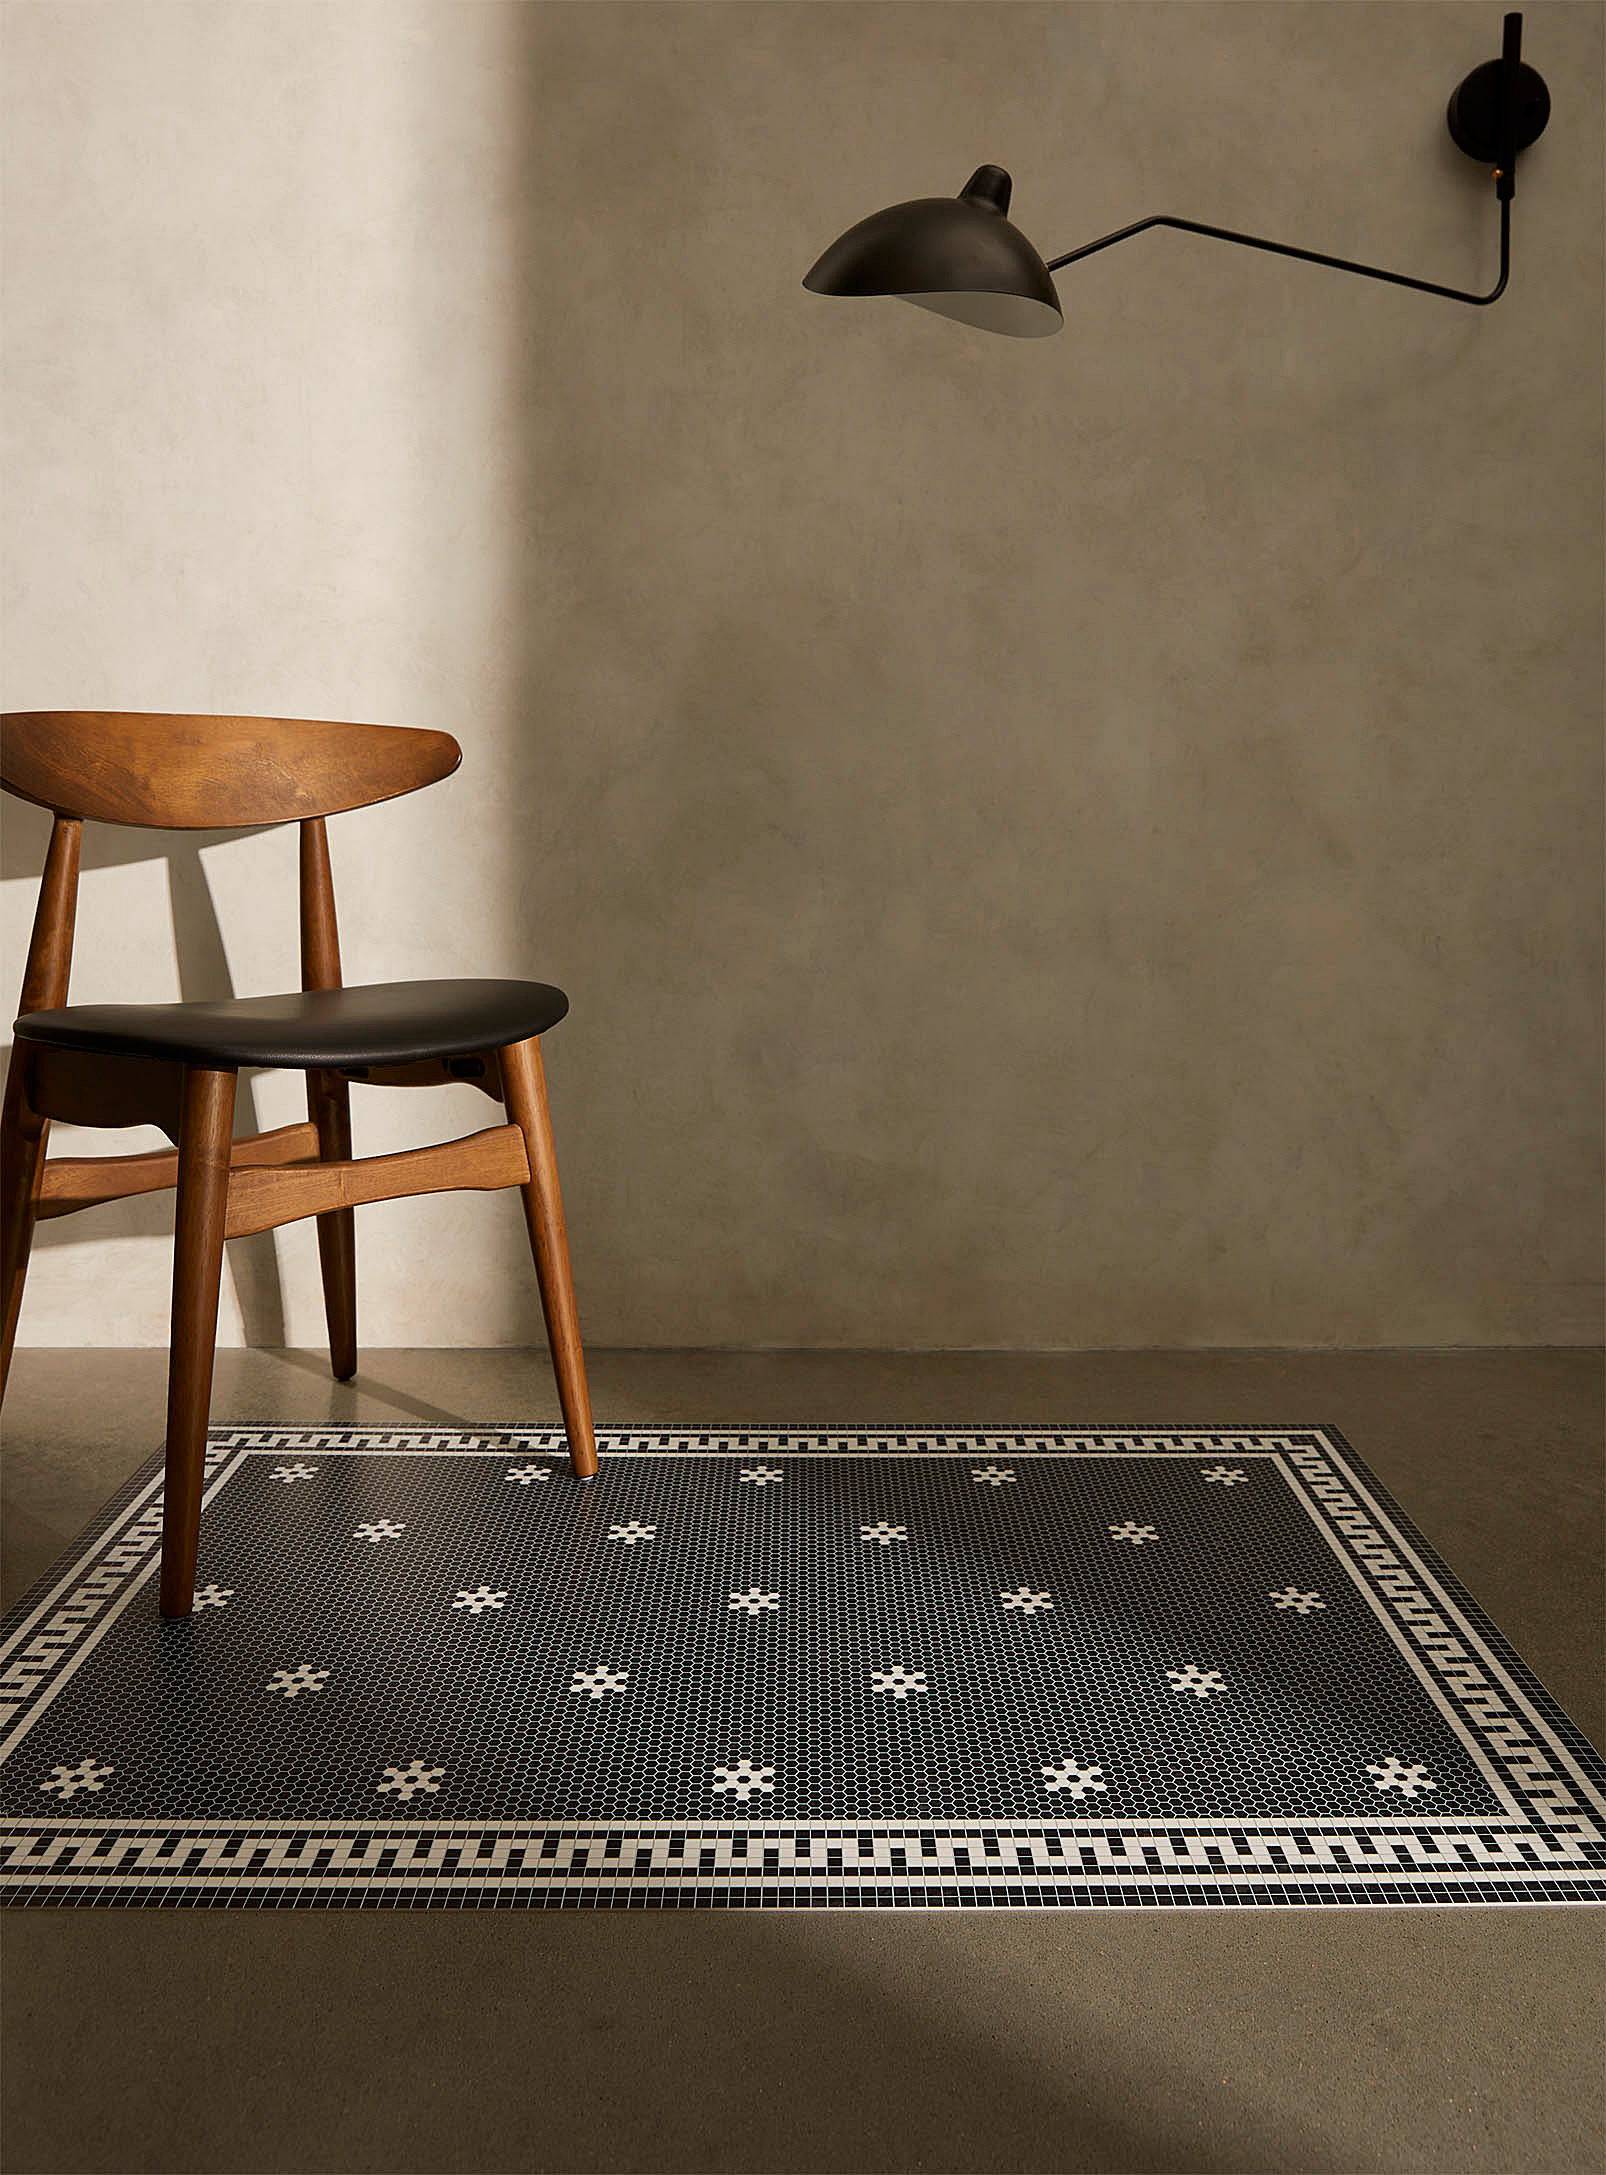 Adama Black Starry Fresco Vinyl Rug See Available Sizes In Patterned Black